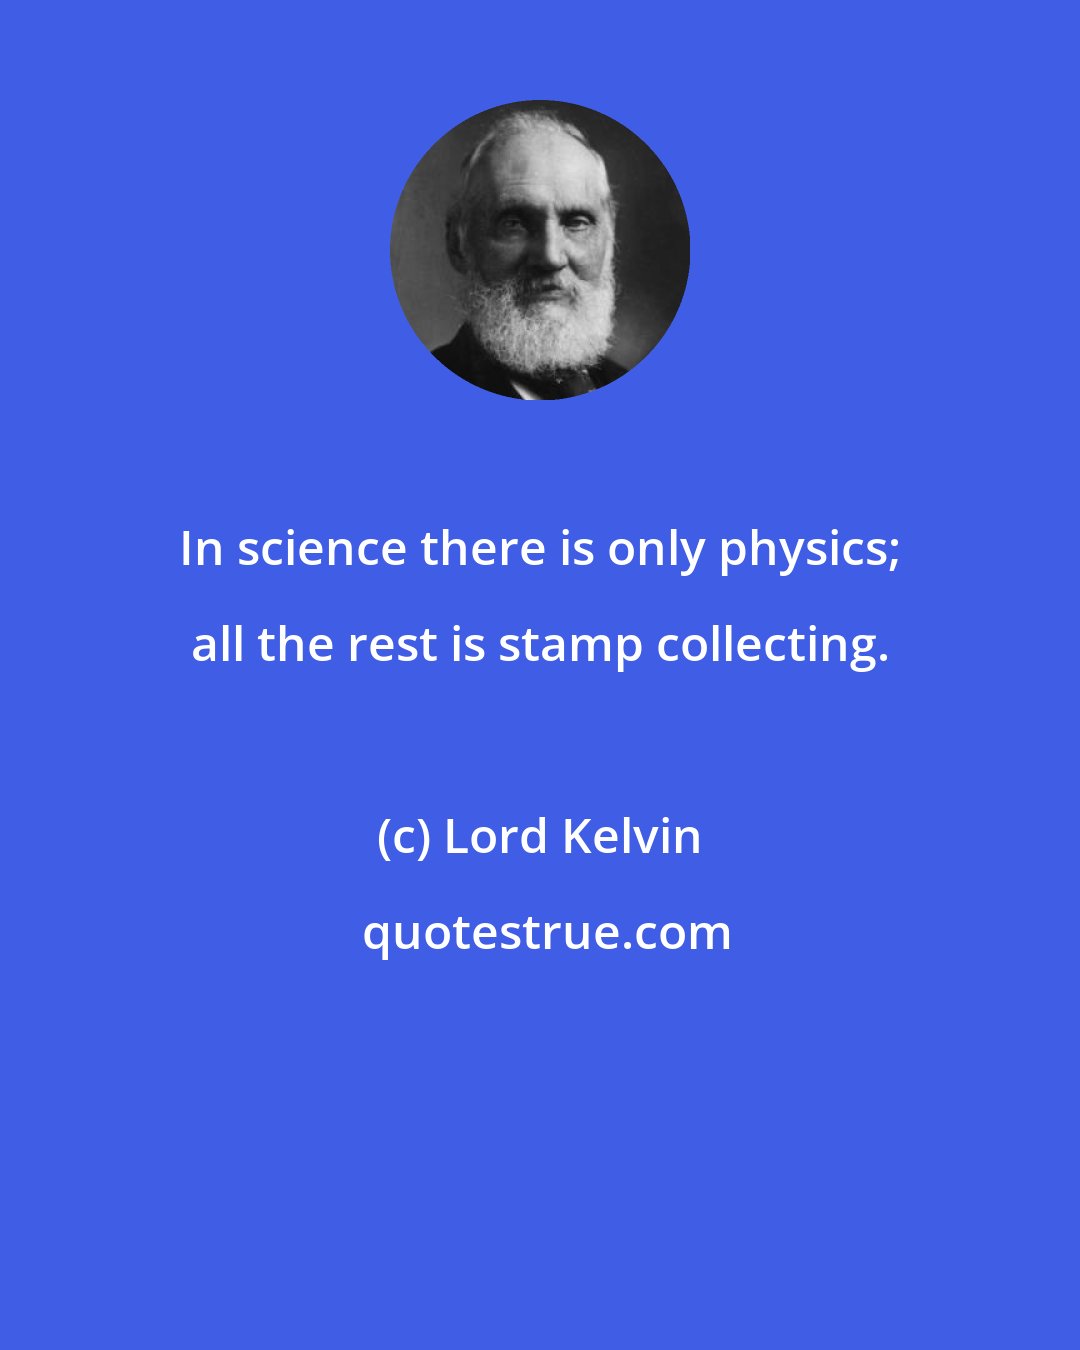 Lord Kelvin: In science there is only physics; all the rest is stamp collecting.